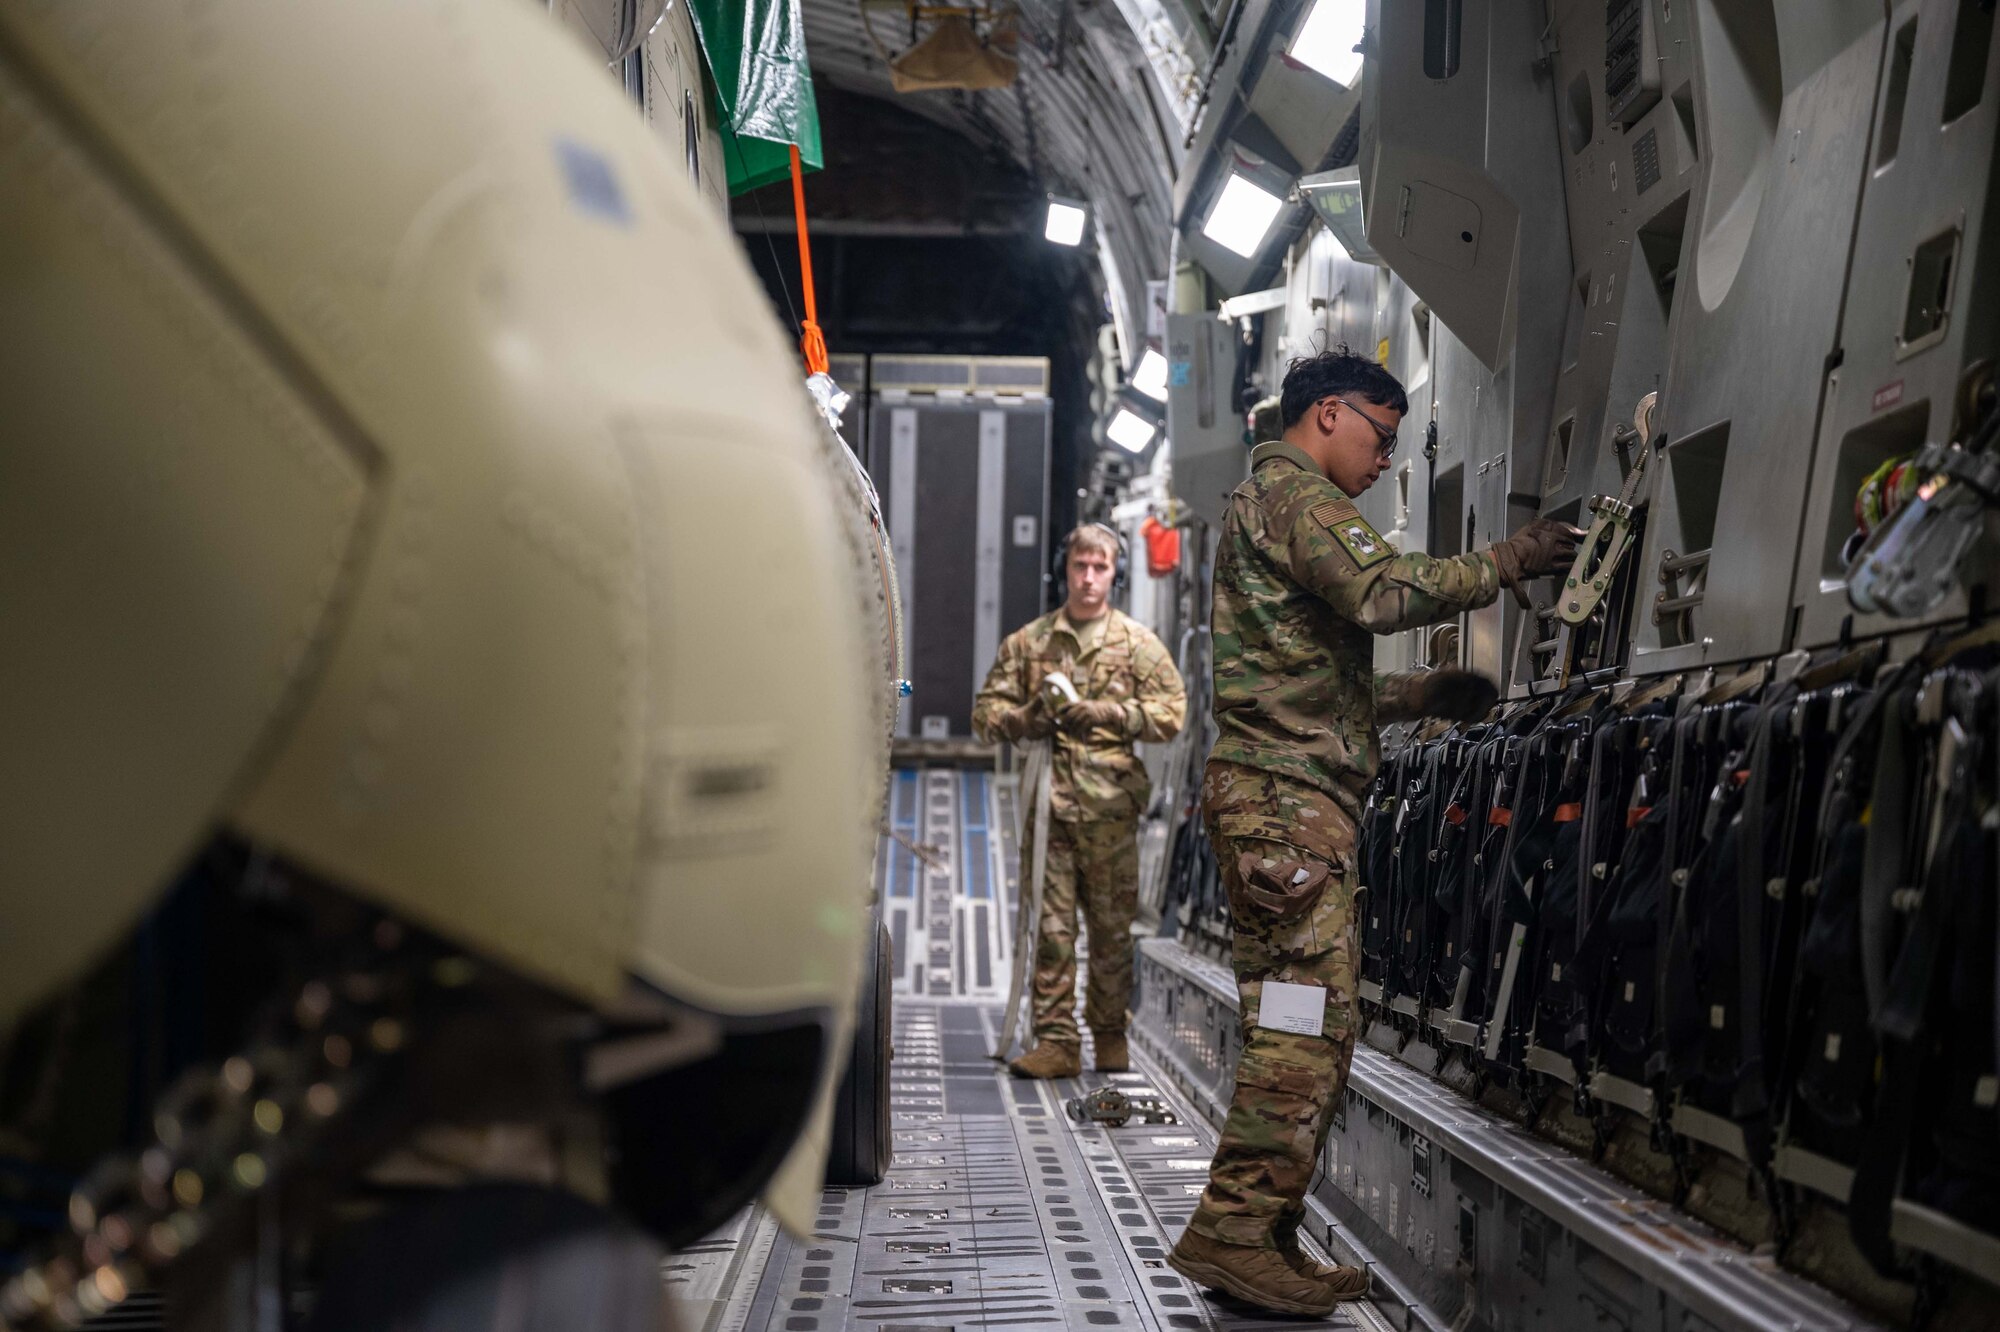 Senior Airman Frankie Arceo, 3rd Airlift Squadron loadmaster, prepares cargo chains before downloading a CH-47F Chinook helicopter from a C-17 Globemaster III assigned to Dover Air Force Base, Delaware, during a foreign military sales mission at Torrejón Air Base, Spain, Jan. 16, 2023. The United States and Spain are close allies and have excellent relations based on shared democratic values, including the promotion of democracy and human rights. (U.S. Air Force photo by Senior Airman Faith Barron)